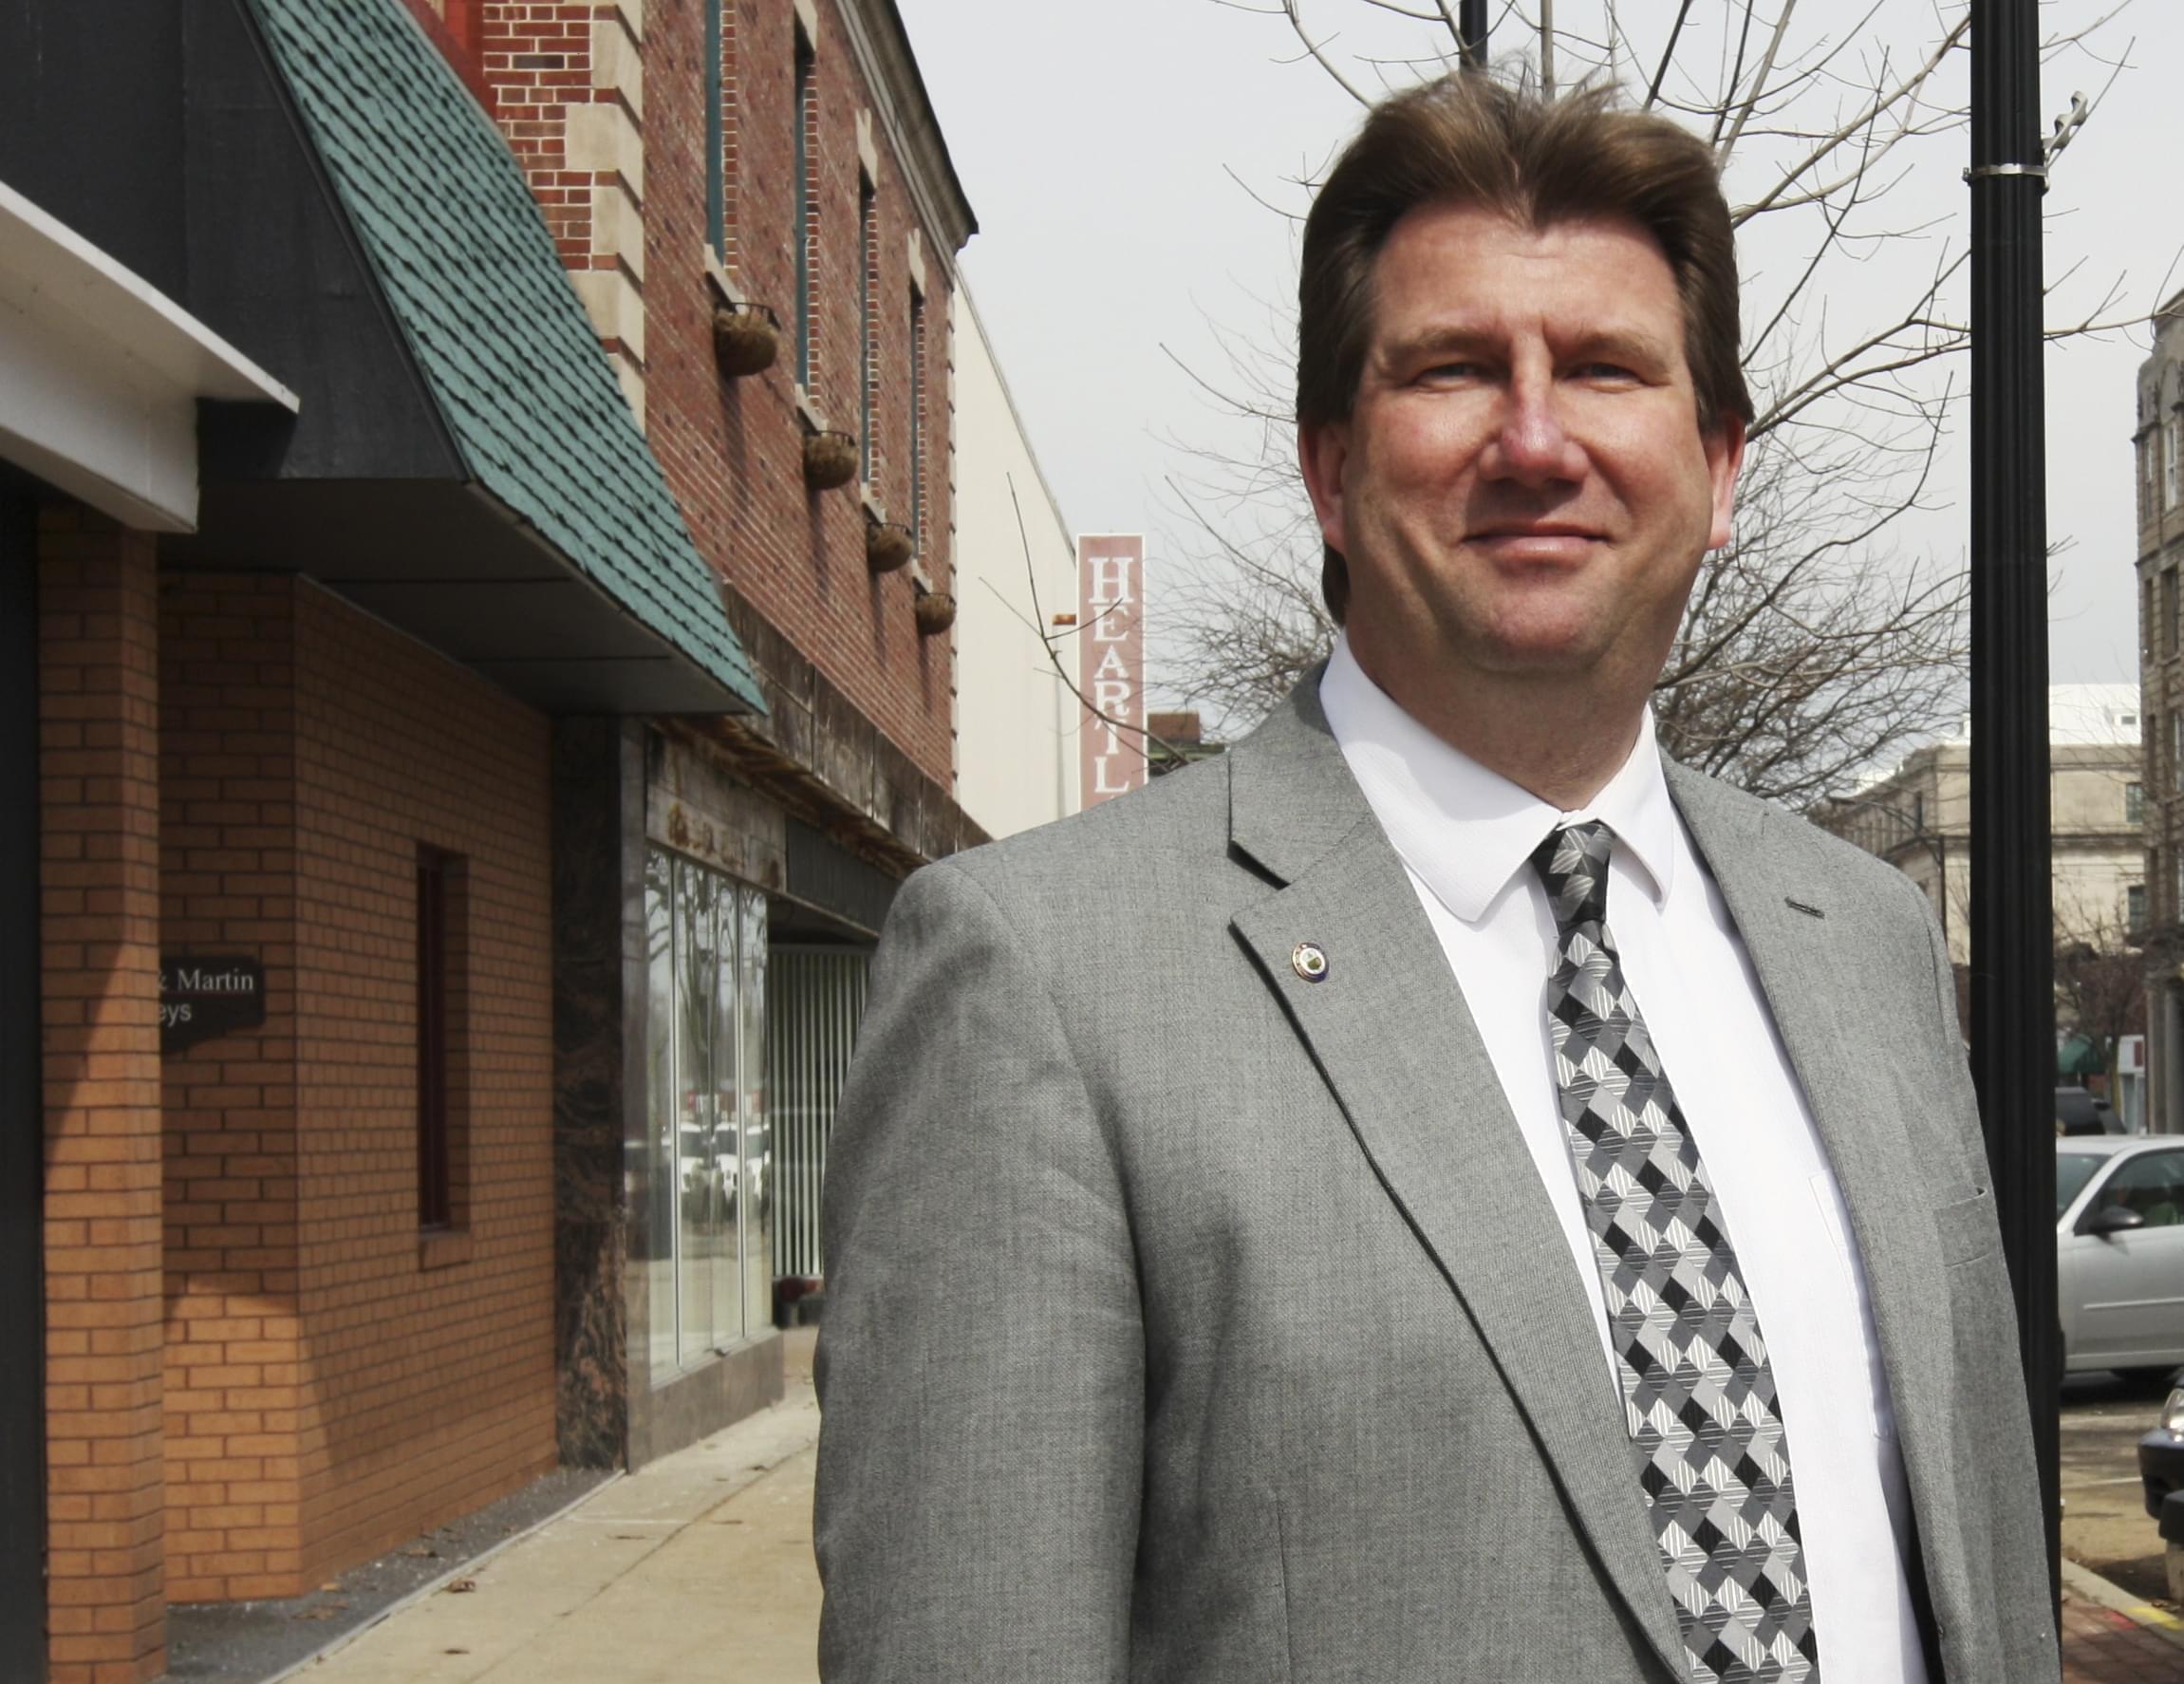 In this March 11, 2014 photo, Scott Eisenhauer, the mayor of Danville, poses for a photo in the downtown area